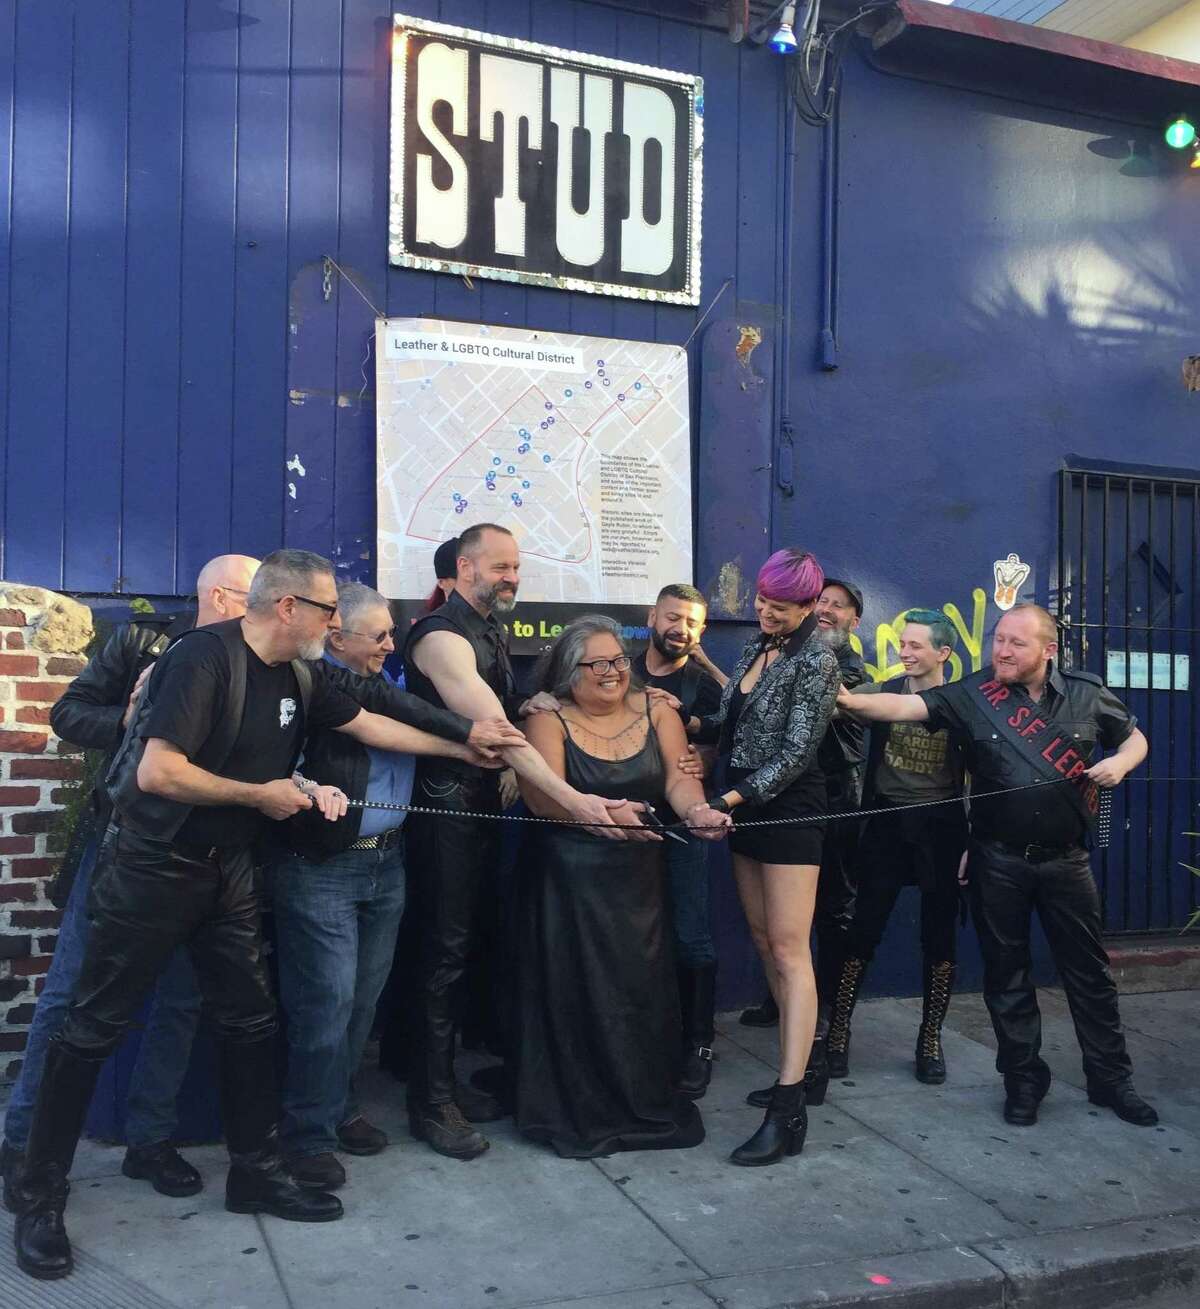 Rachele Sullivan (with scissors) at the opening of the Leather & LGBTQ Historical District in 2018.